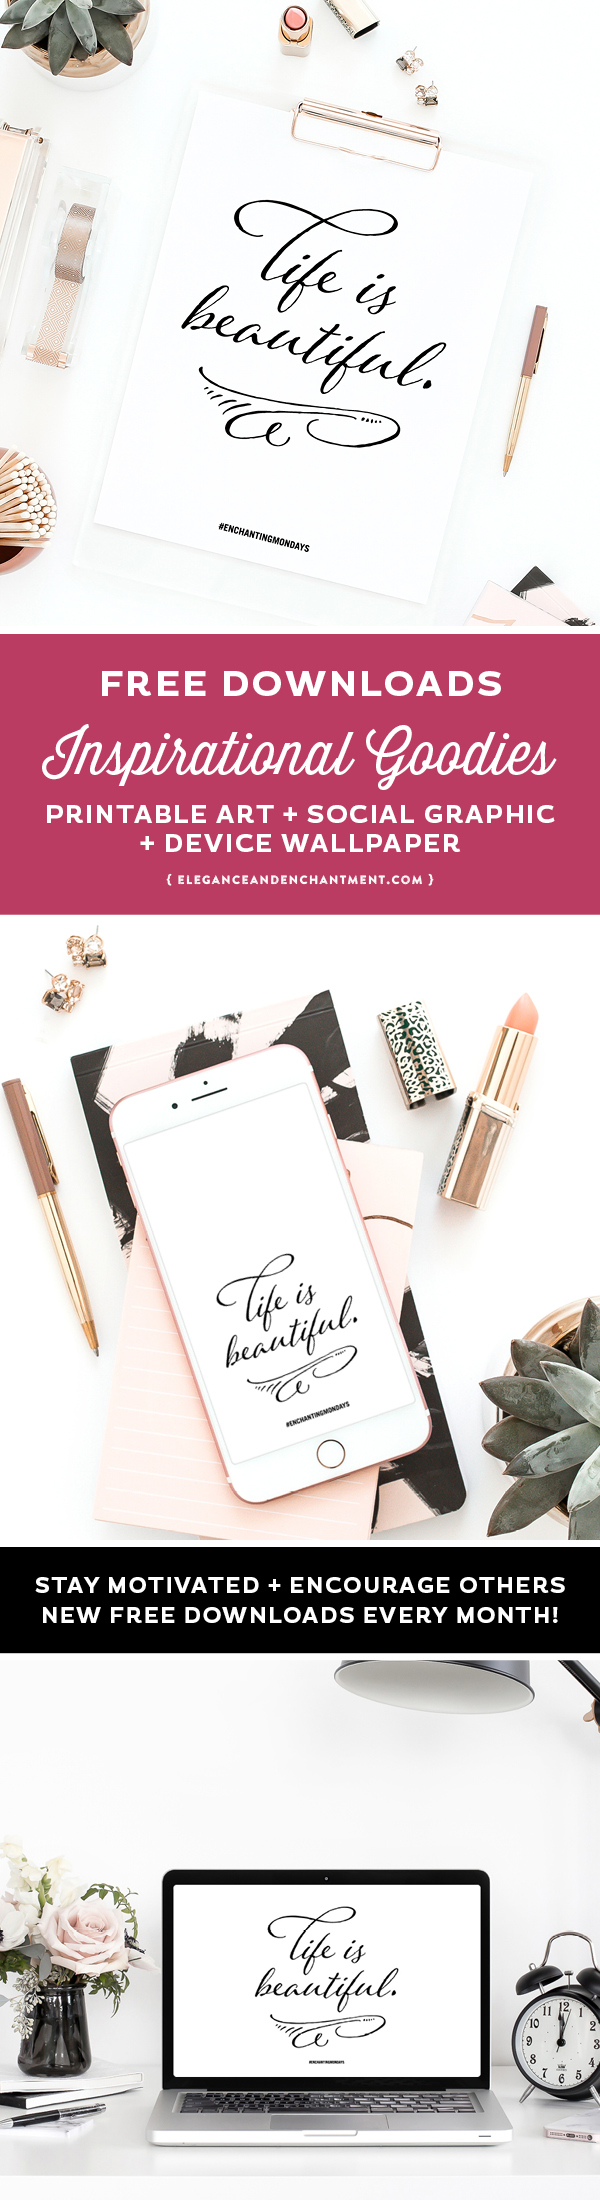 Life is beautiful. Enjoy these free inspirational downloads including printable art, a social graphic, and device wallpaper for you phone, tablet and desktop. New motivational designs shared every month! Spread the love by sharing with a friend! // Designs from Elegance + Enchantment